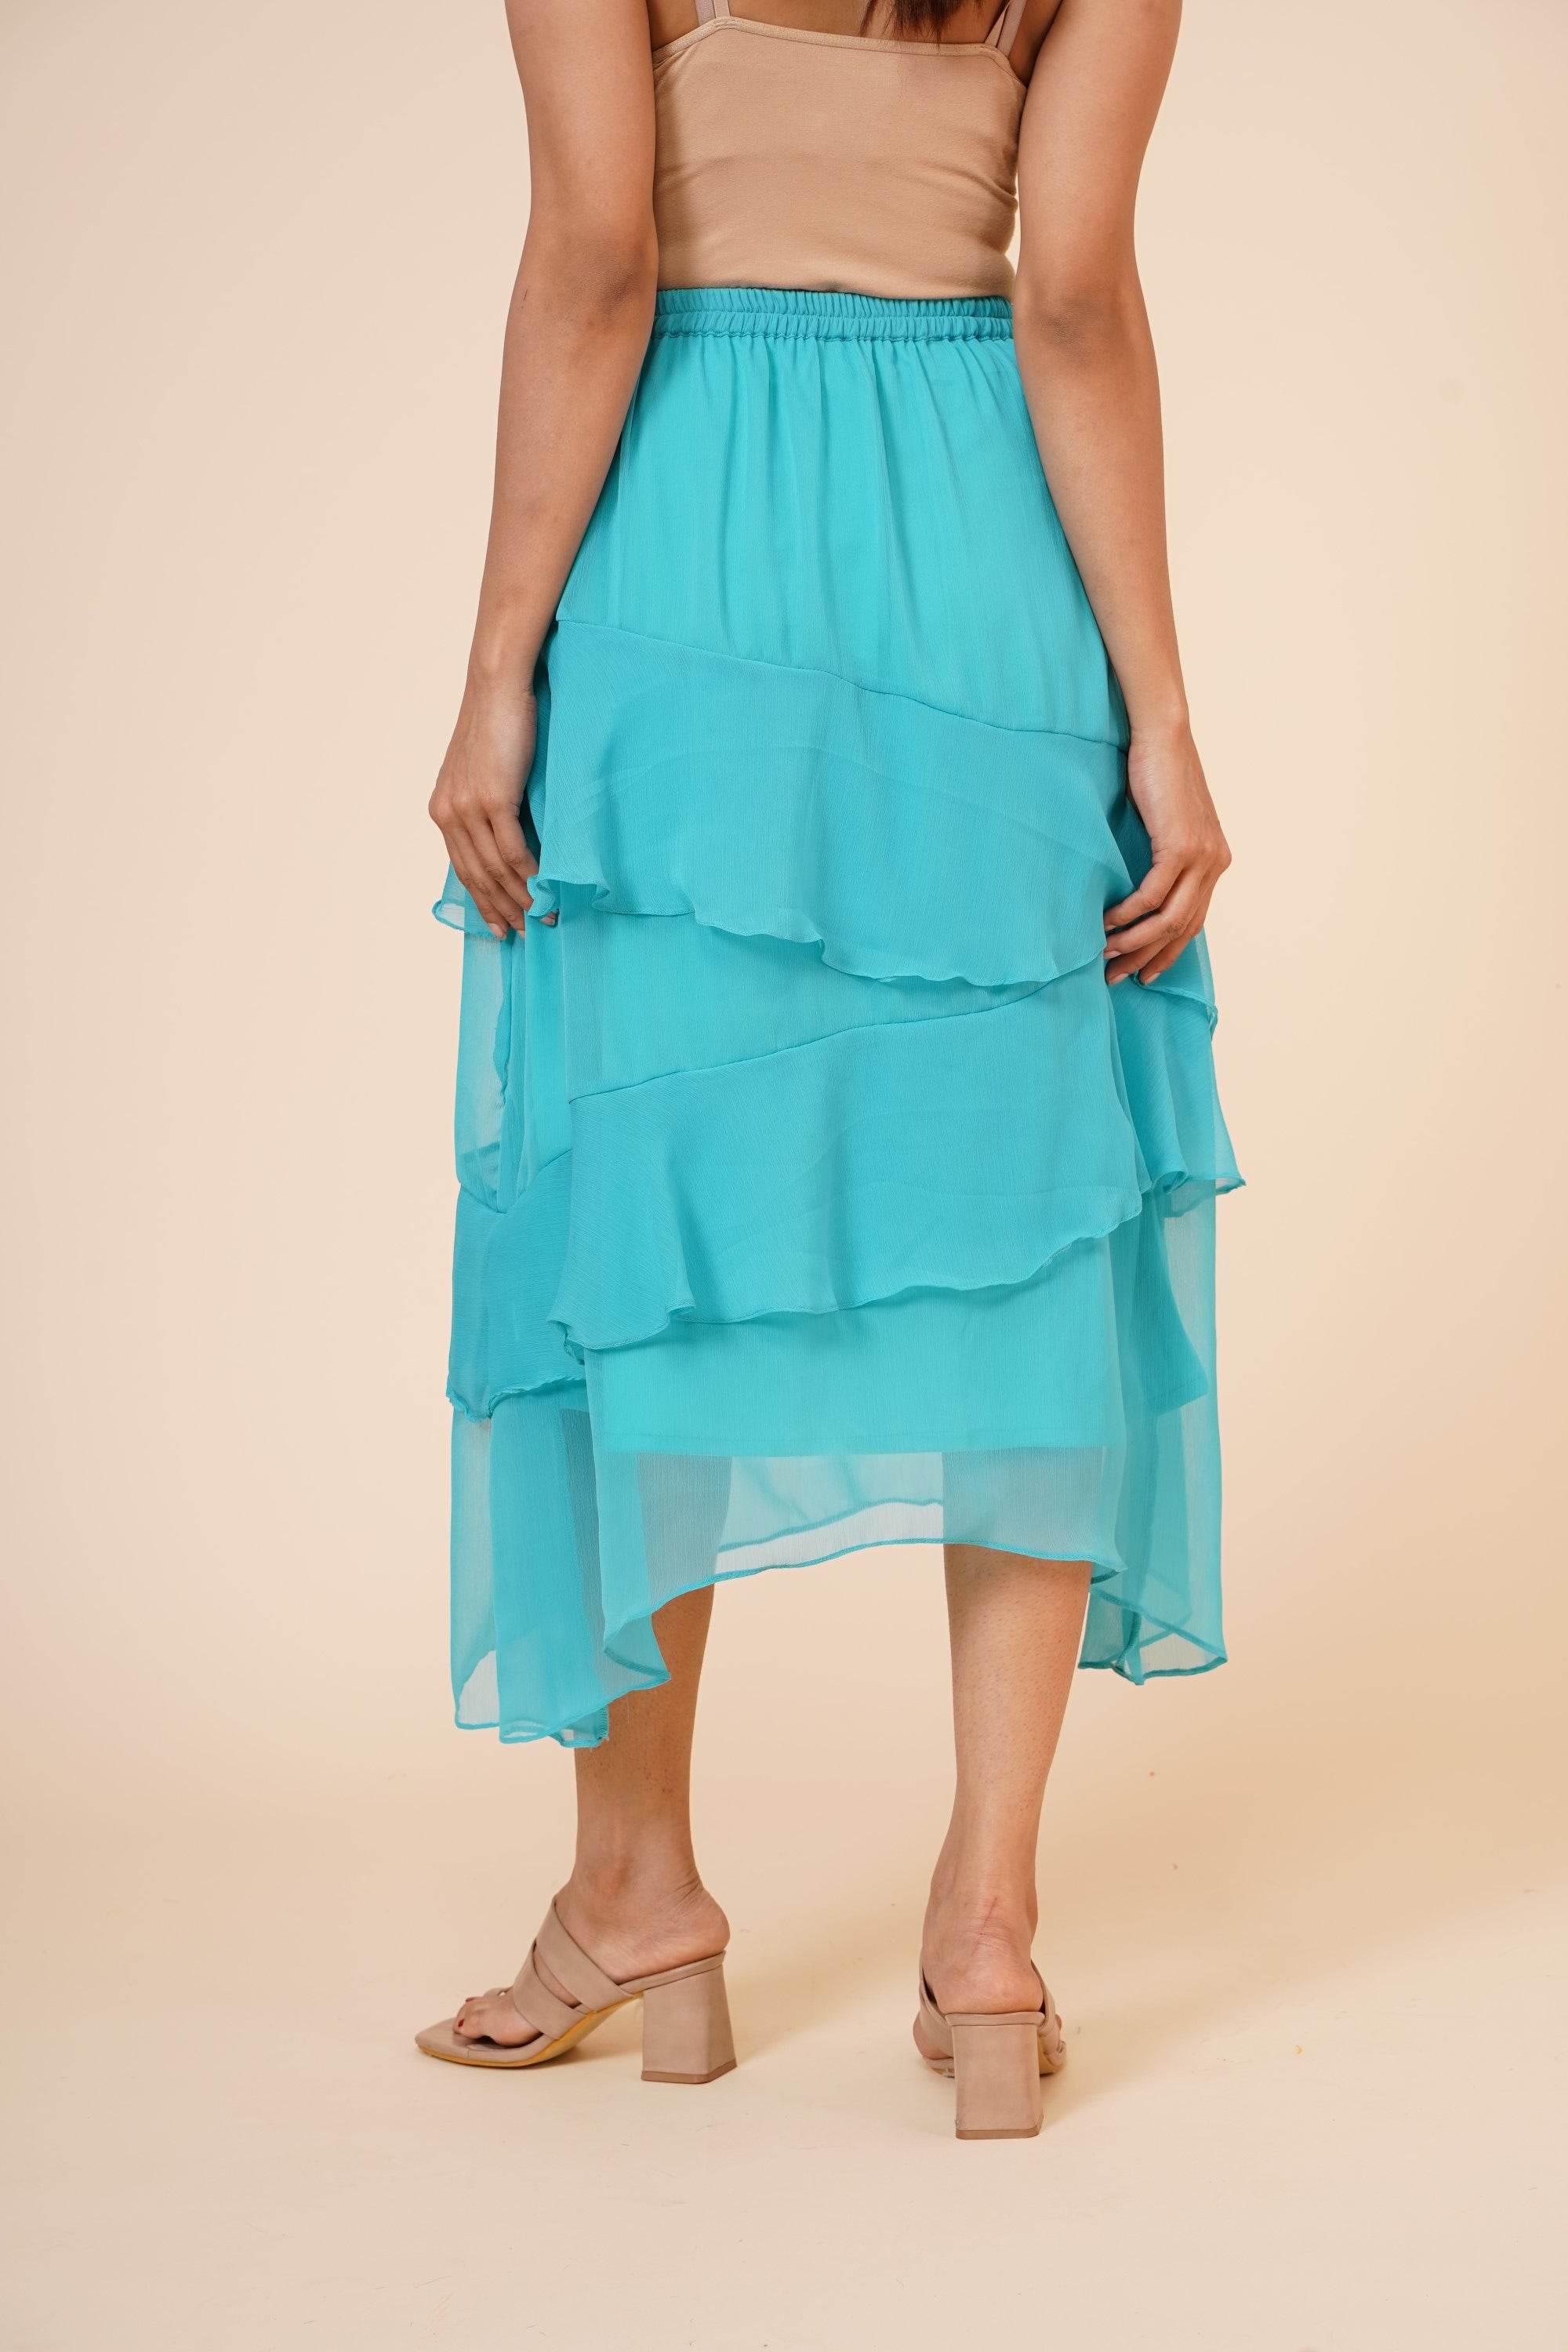 Women's Chiffon Ruffle Skirt With Elastic In Sky Blue - MIRACOLOS by Ruchi